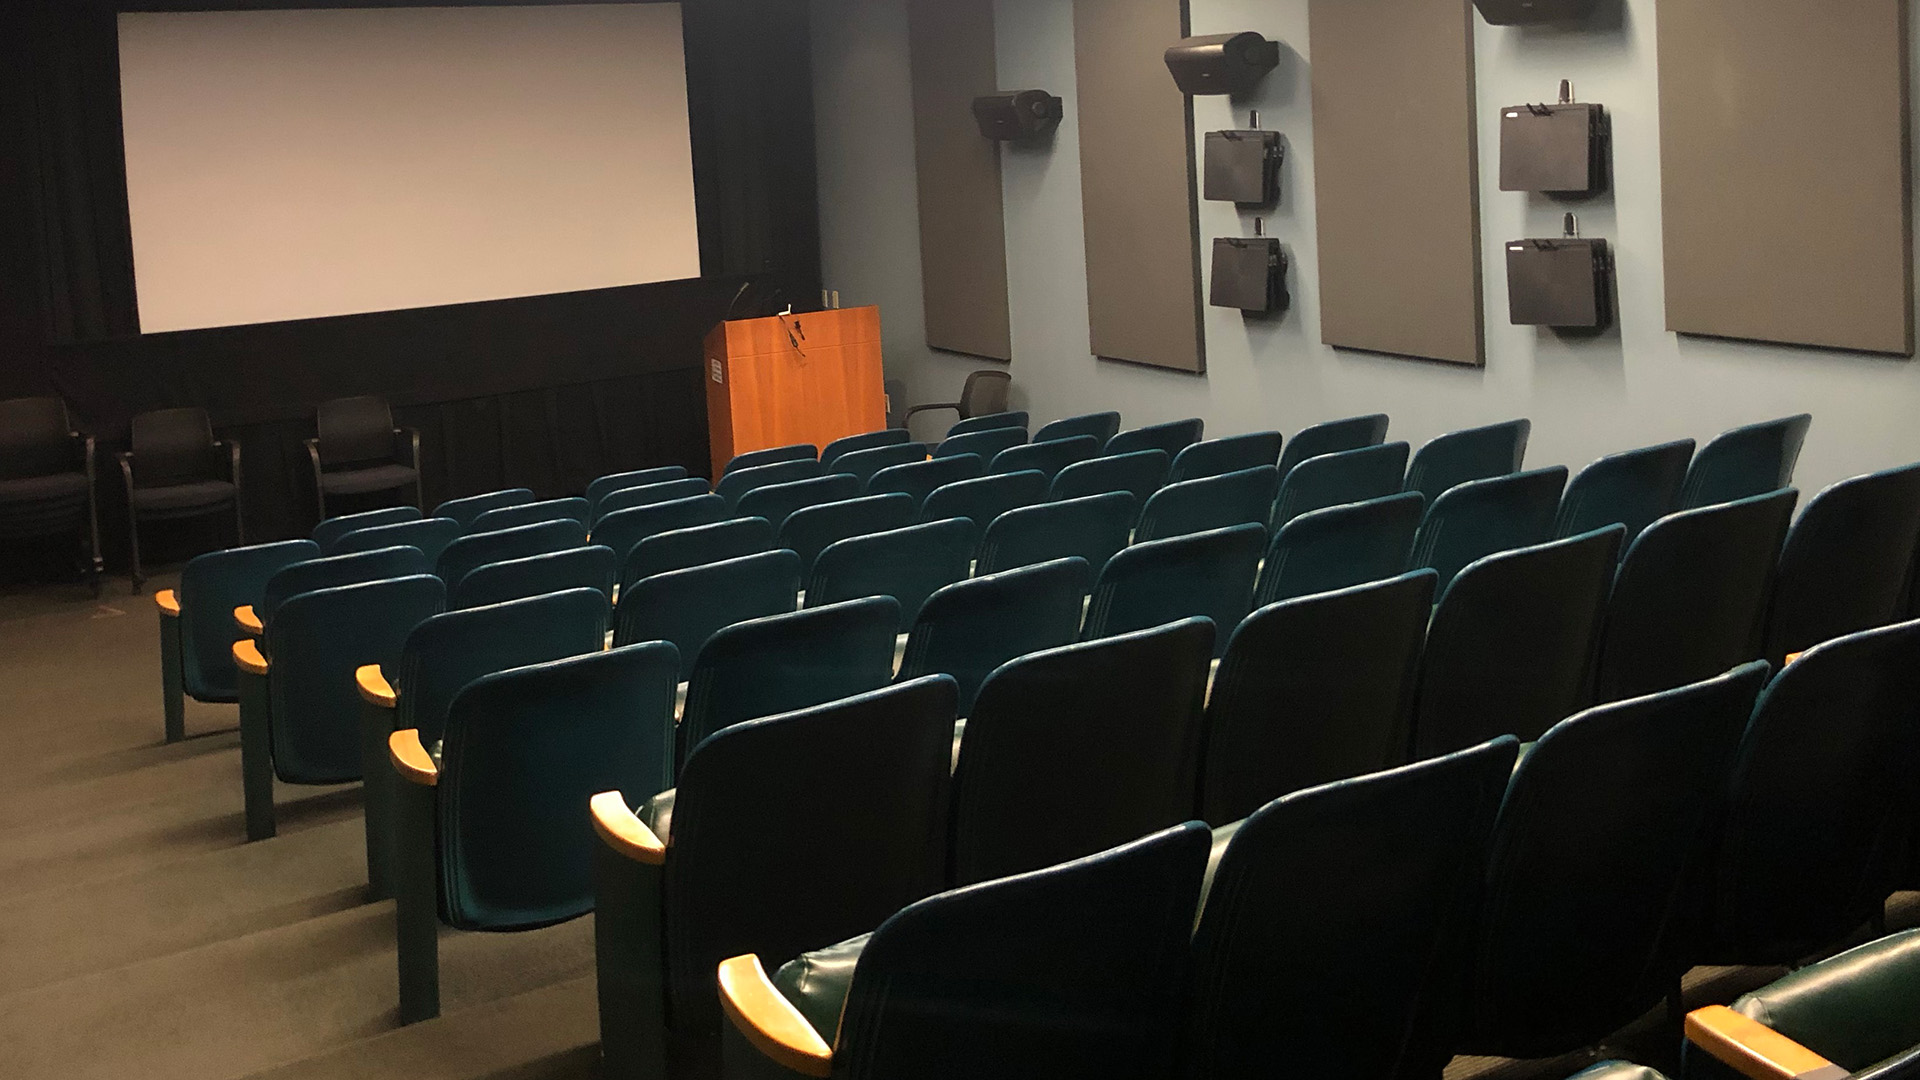 Chairs in the Michelson Theater facing a screen